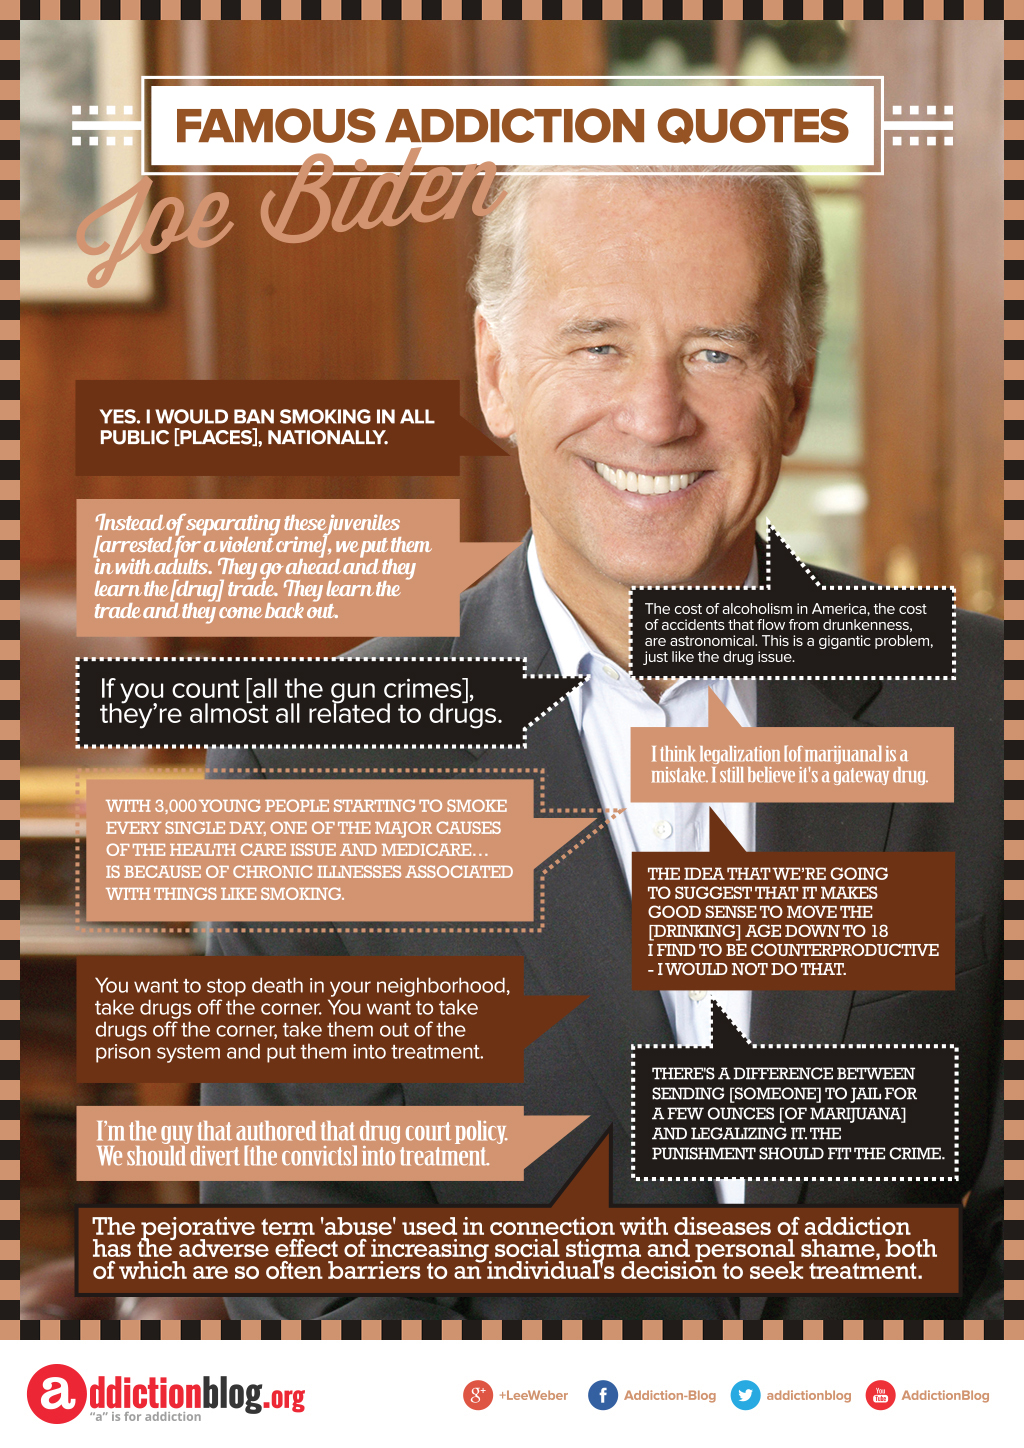 Joe Biden’s quotes on substance abuse and drug laws (INFOGRAPHIC)